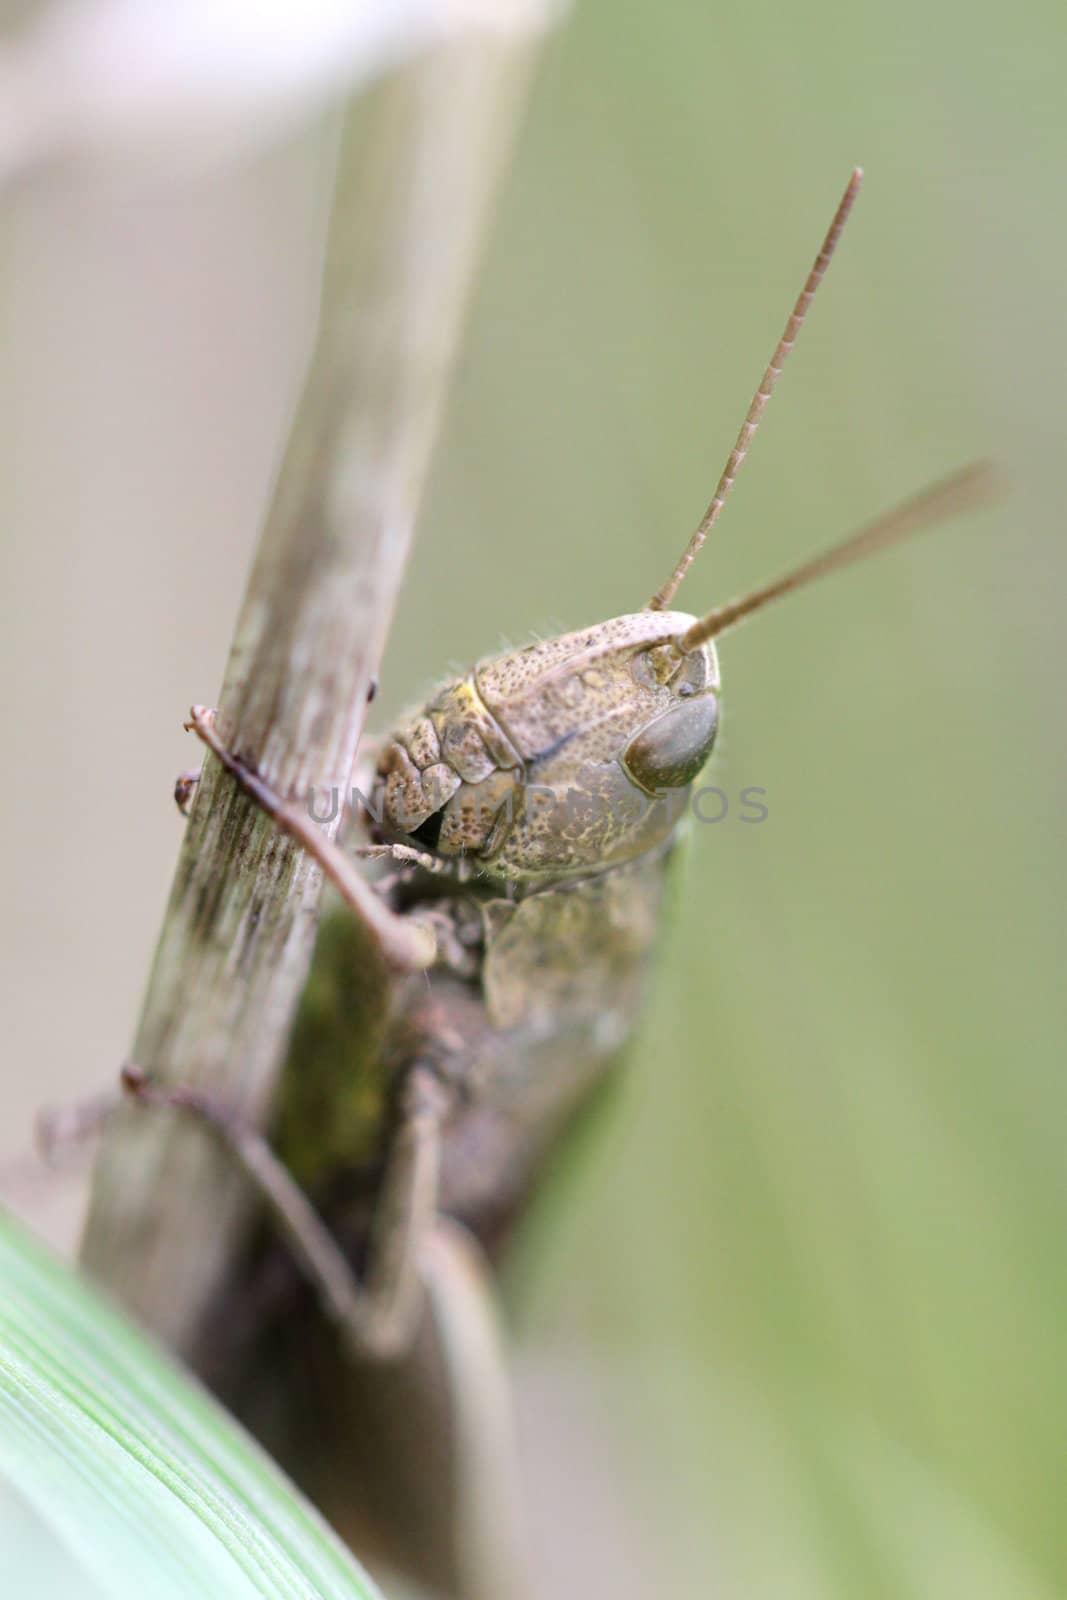 Brown grasshopper sits in the grass